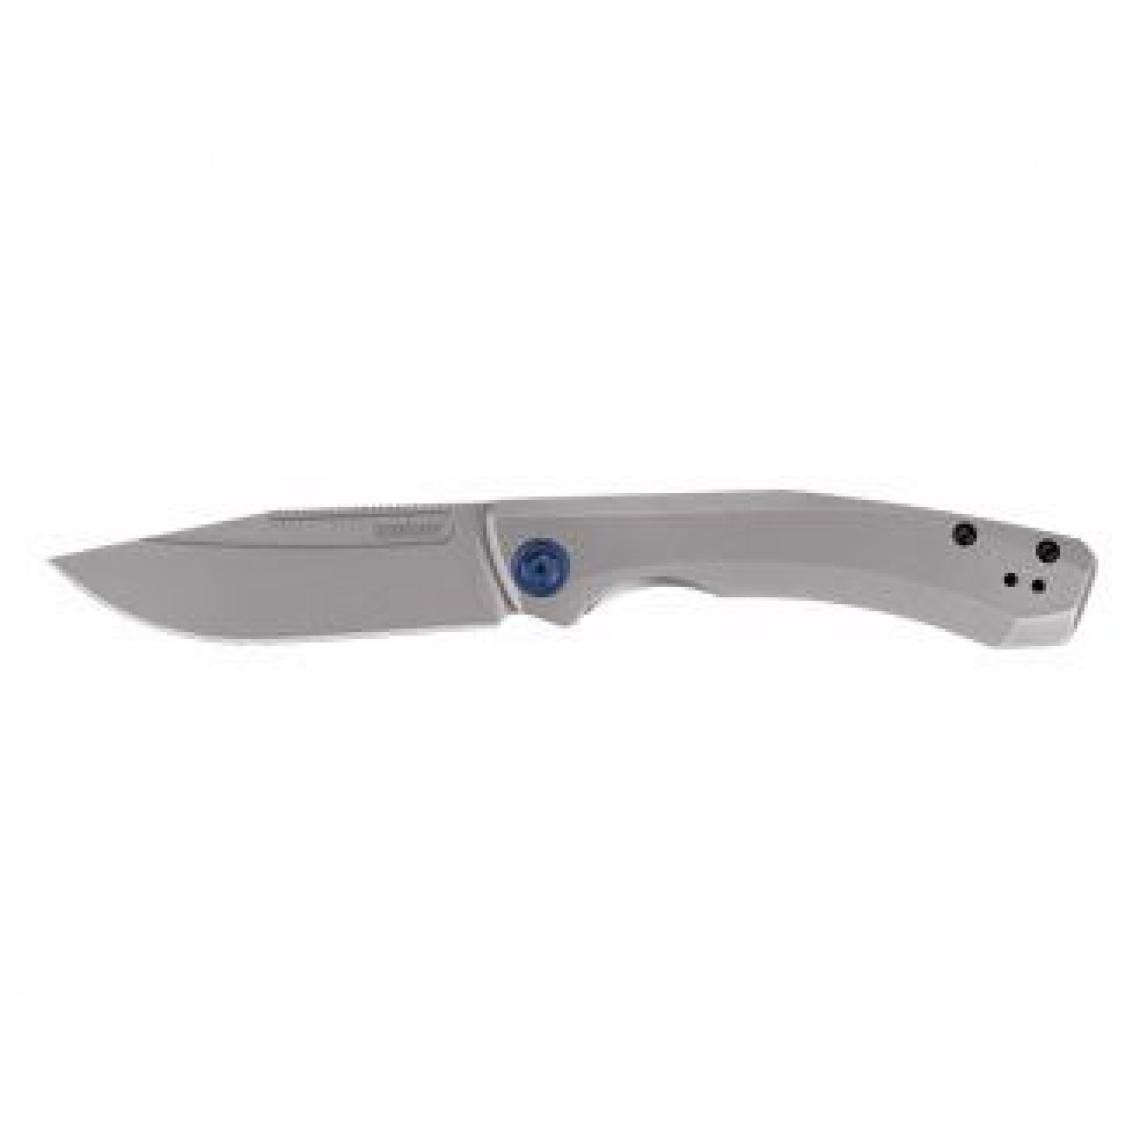 Divers Marques - Kershaw HIGHBALL XL 7020 - Outils de coupe